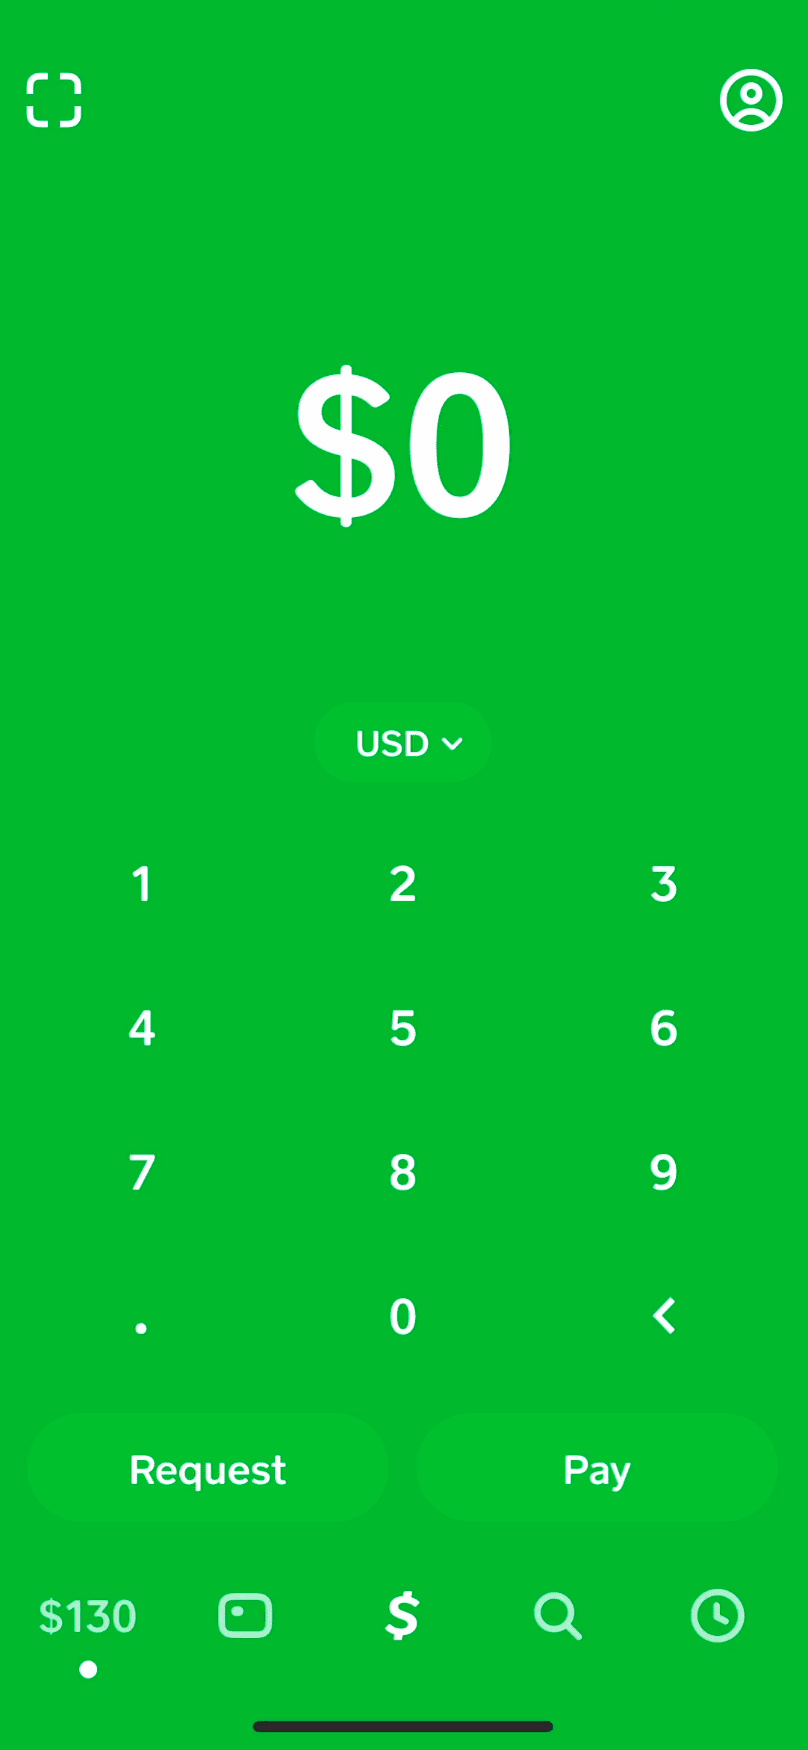 how to access cash app without phone number or email